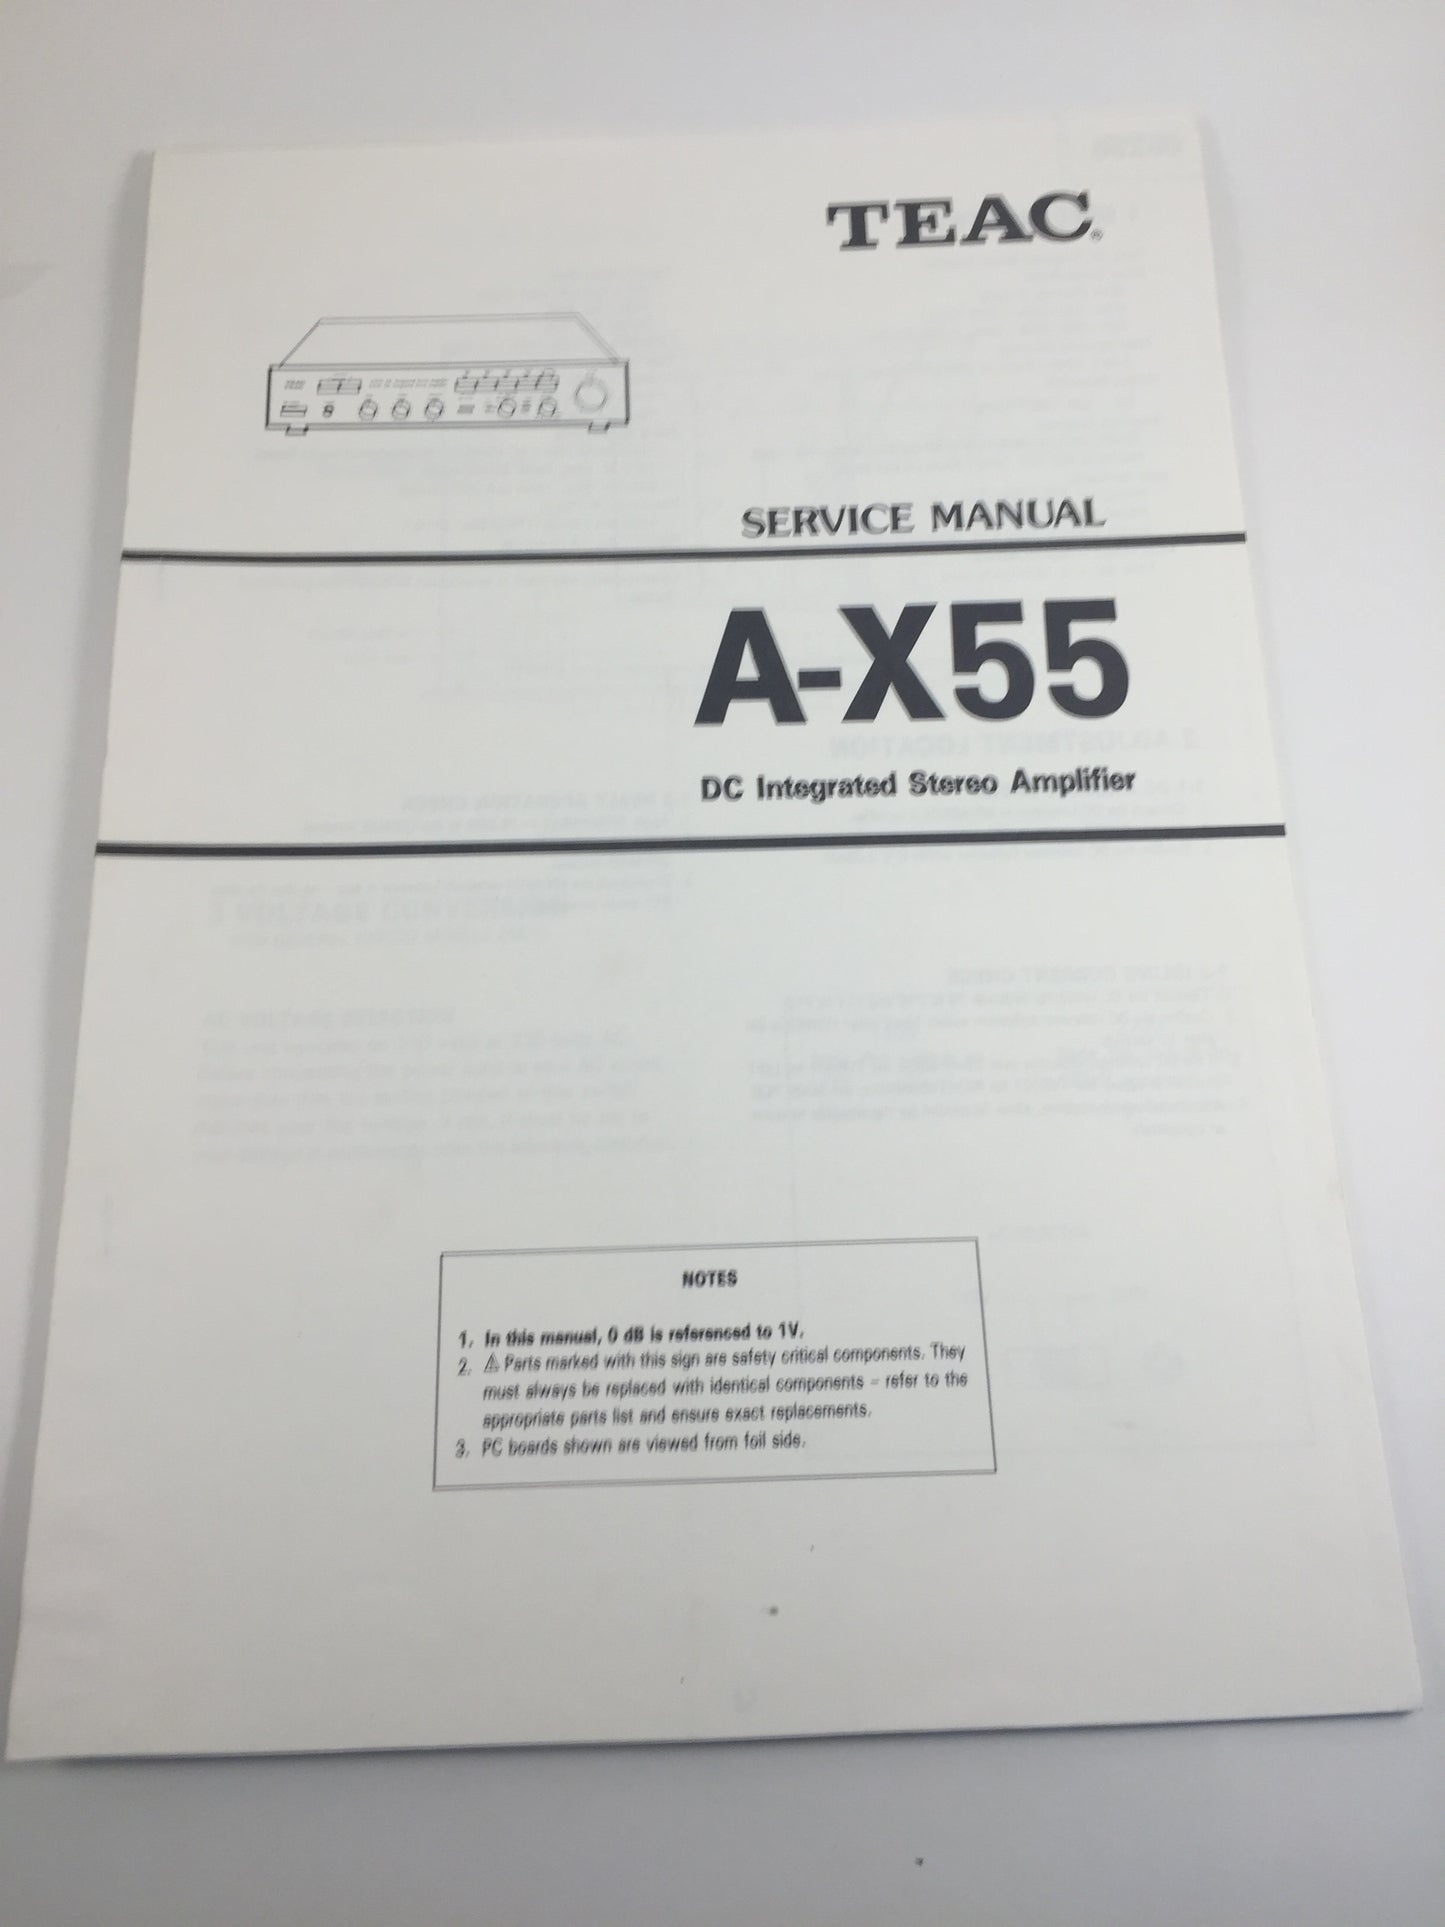 TEAC A-X55 DC Integrated Stereo Amplifier Service Manual